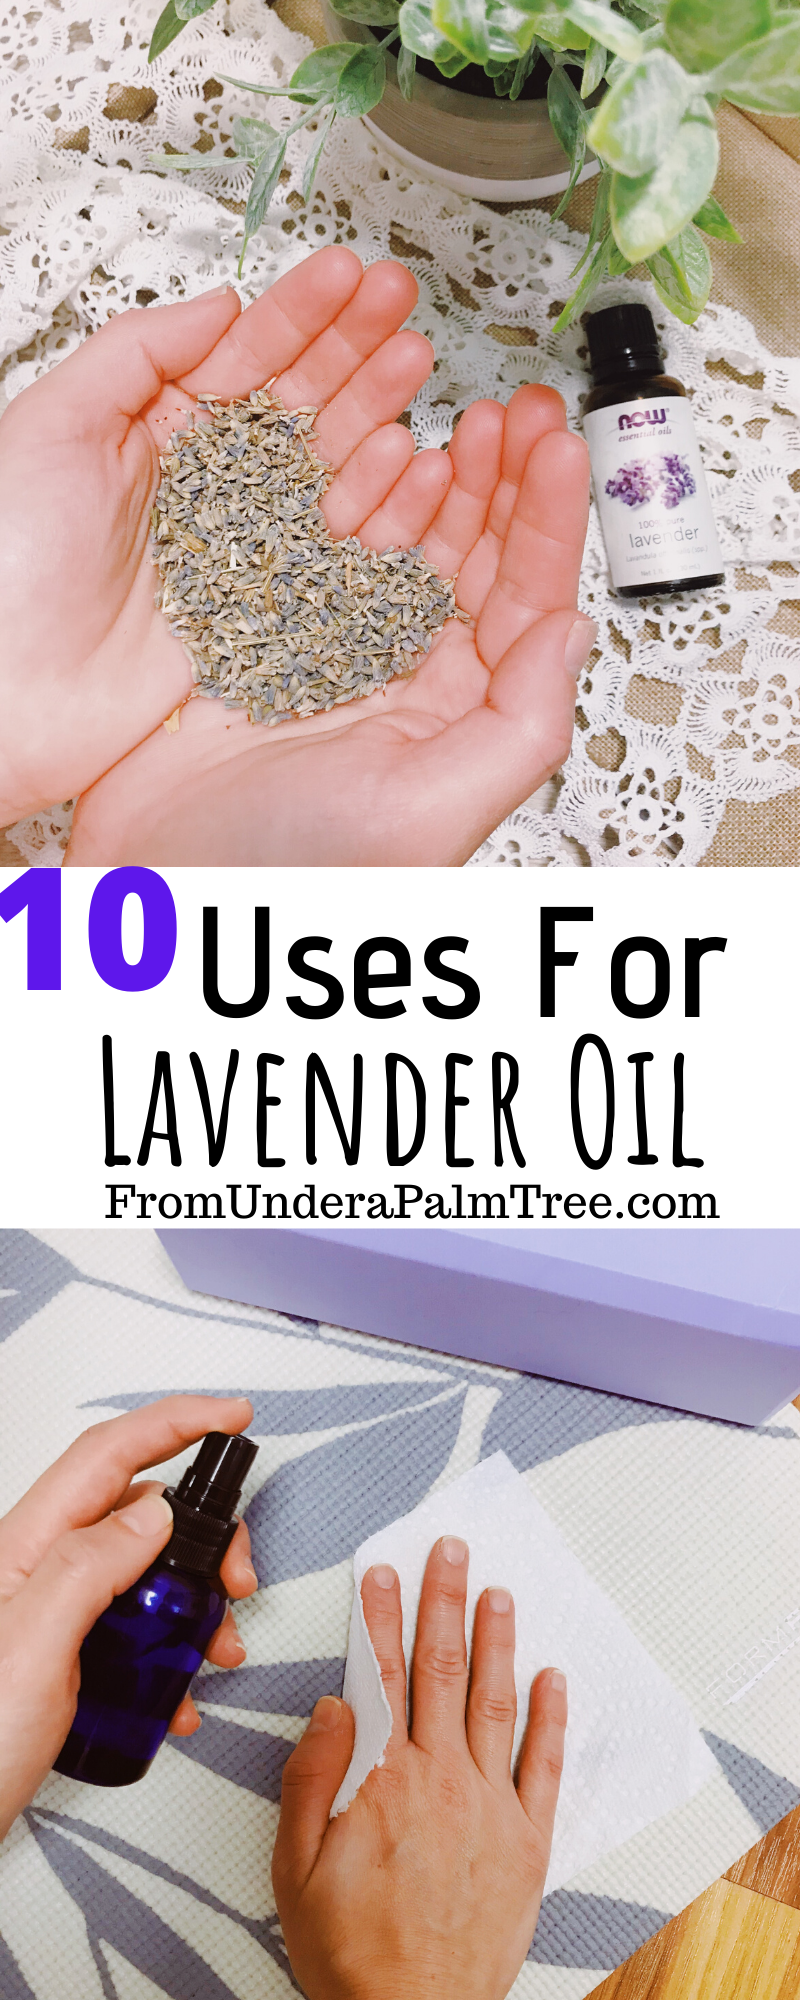 uses for lavender oil | lavender oil uses | DIY lavender oil recipes | DIY lavender oil uses | DIY lavender oil roller ball | DIY lavender oil bath soak | what can I do with my lavender oil |